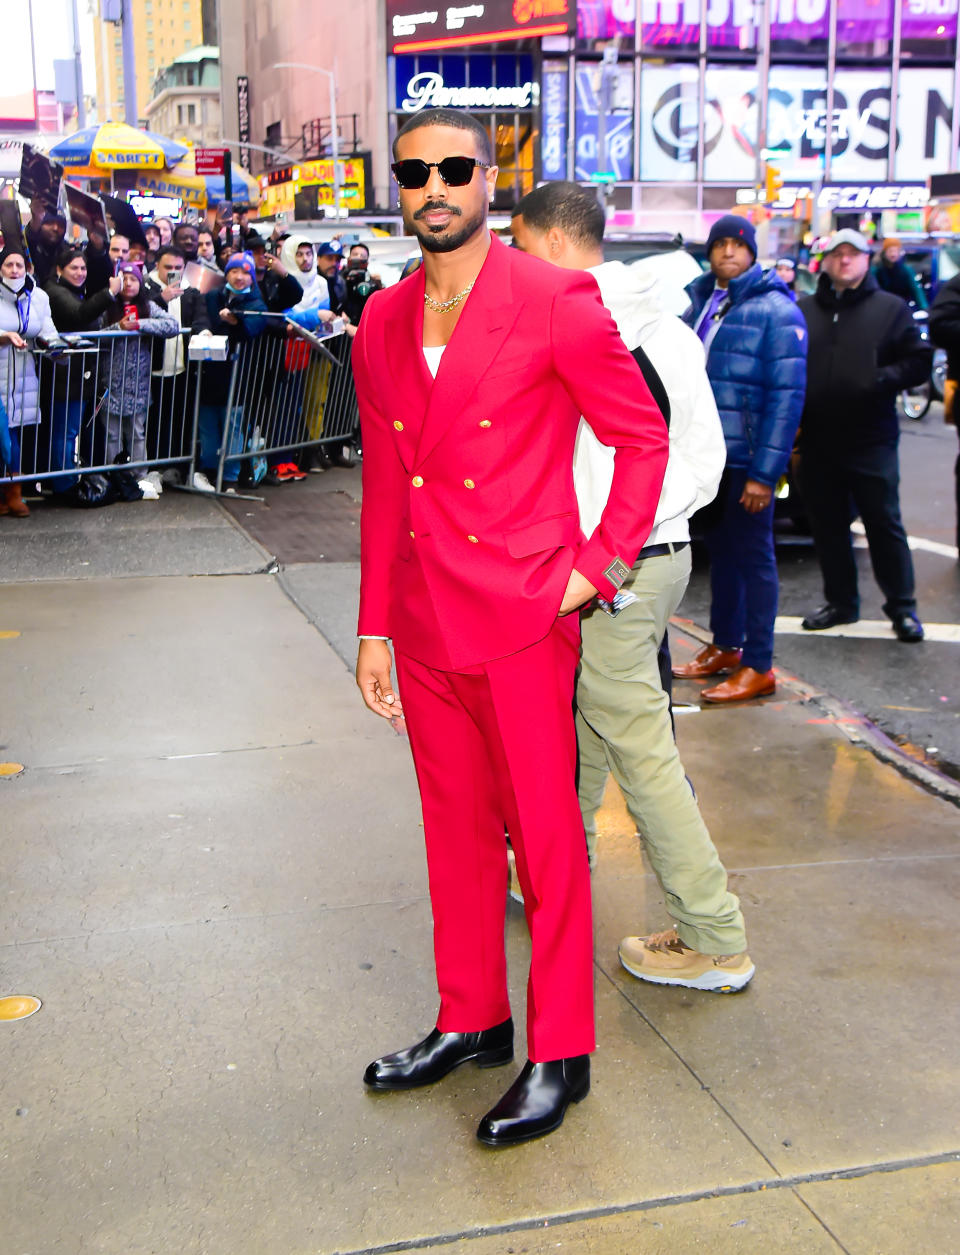 NEW YORK, NEW YORK - FEBRUARY 21: Michael B Jordan is seen outside "The View" on February 21, 2023 in New York City. (Photo by Raymond Hall/GC Images)